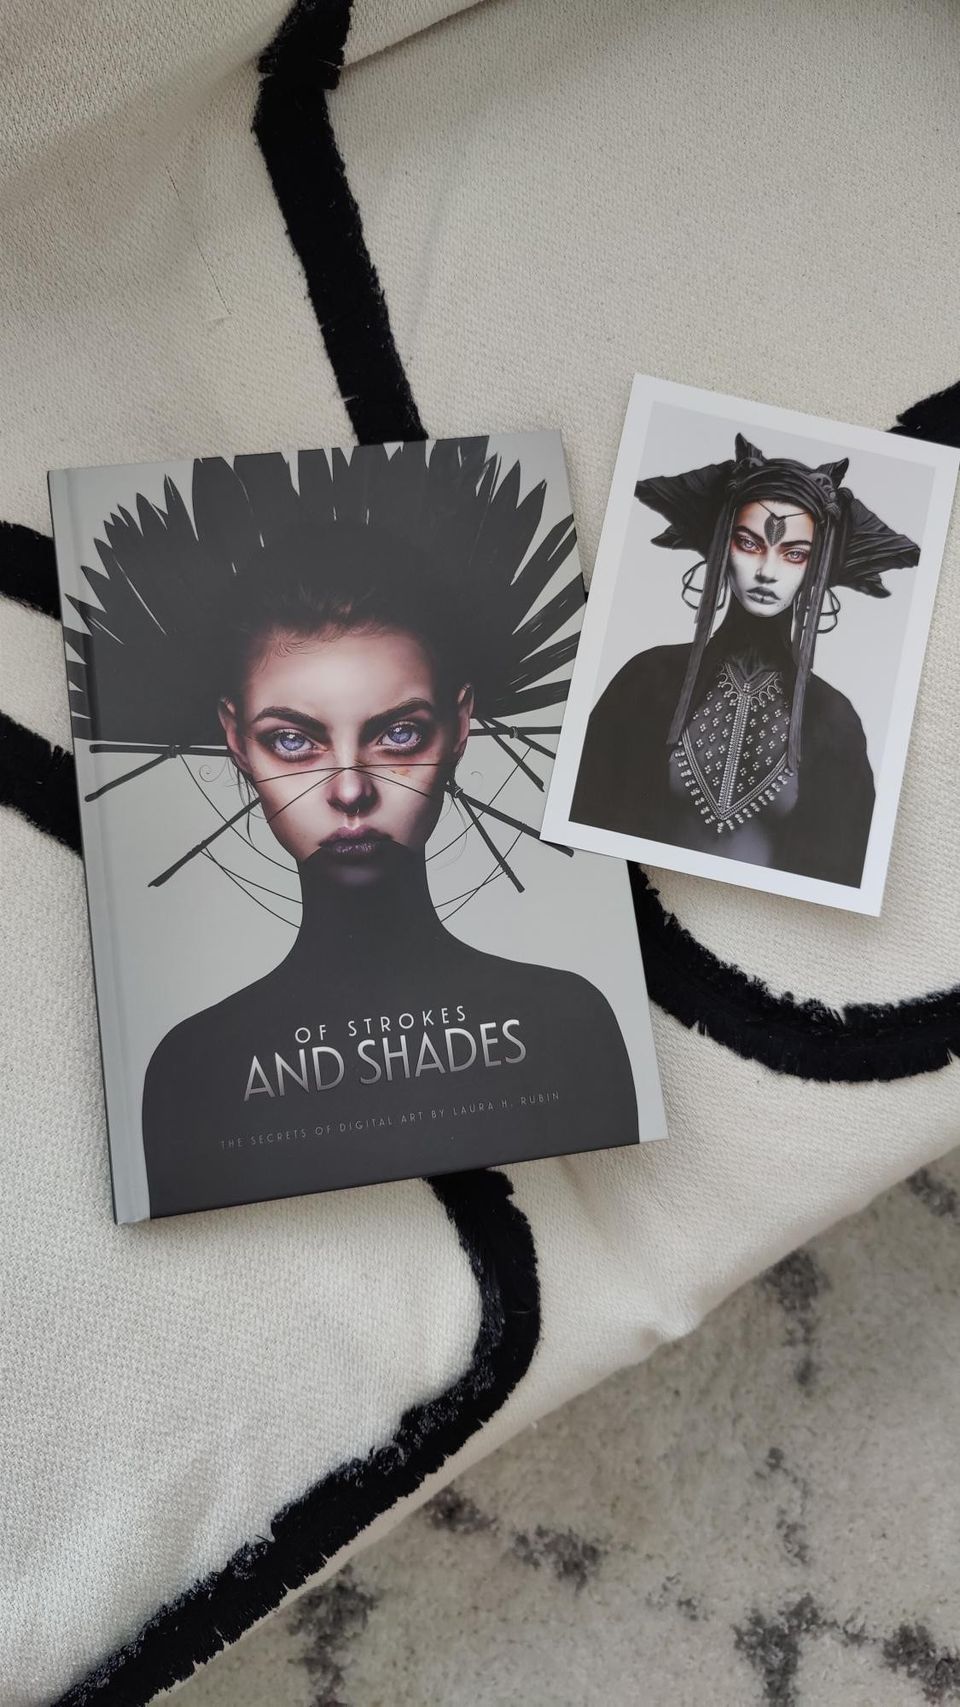 Of Strokes and shade art book + art print